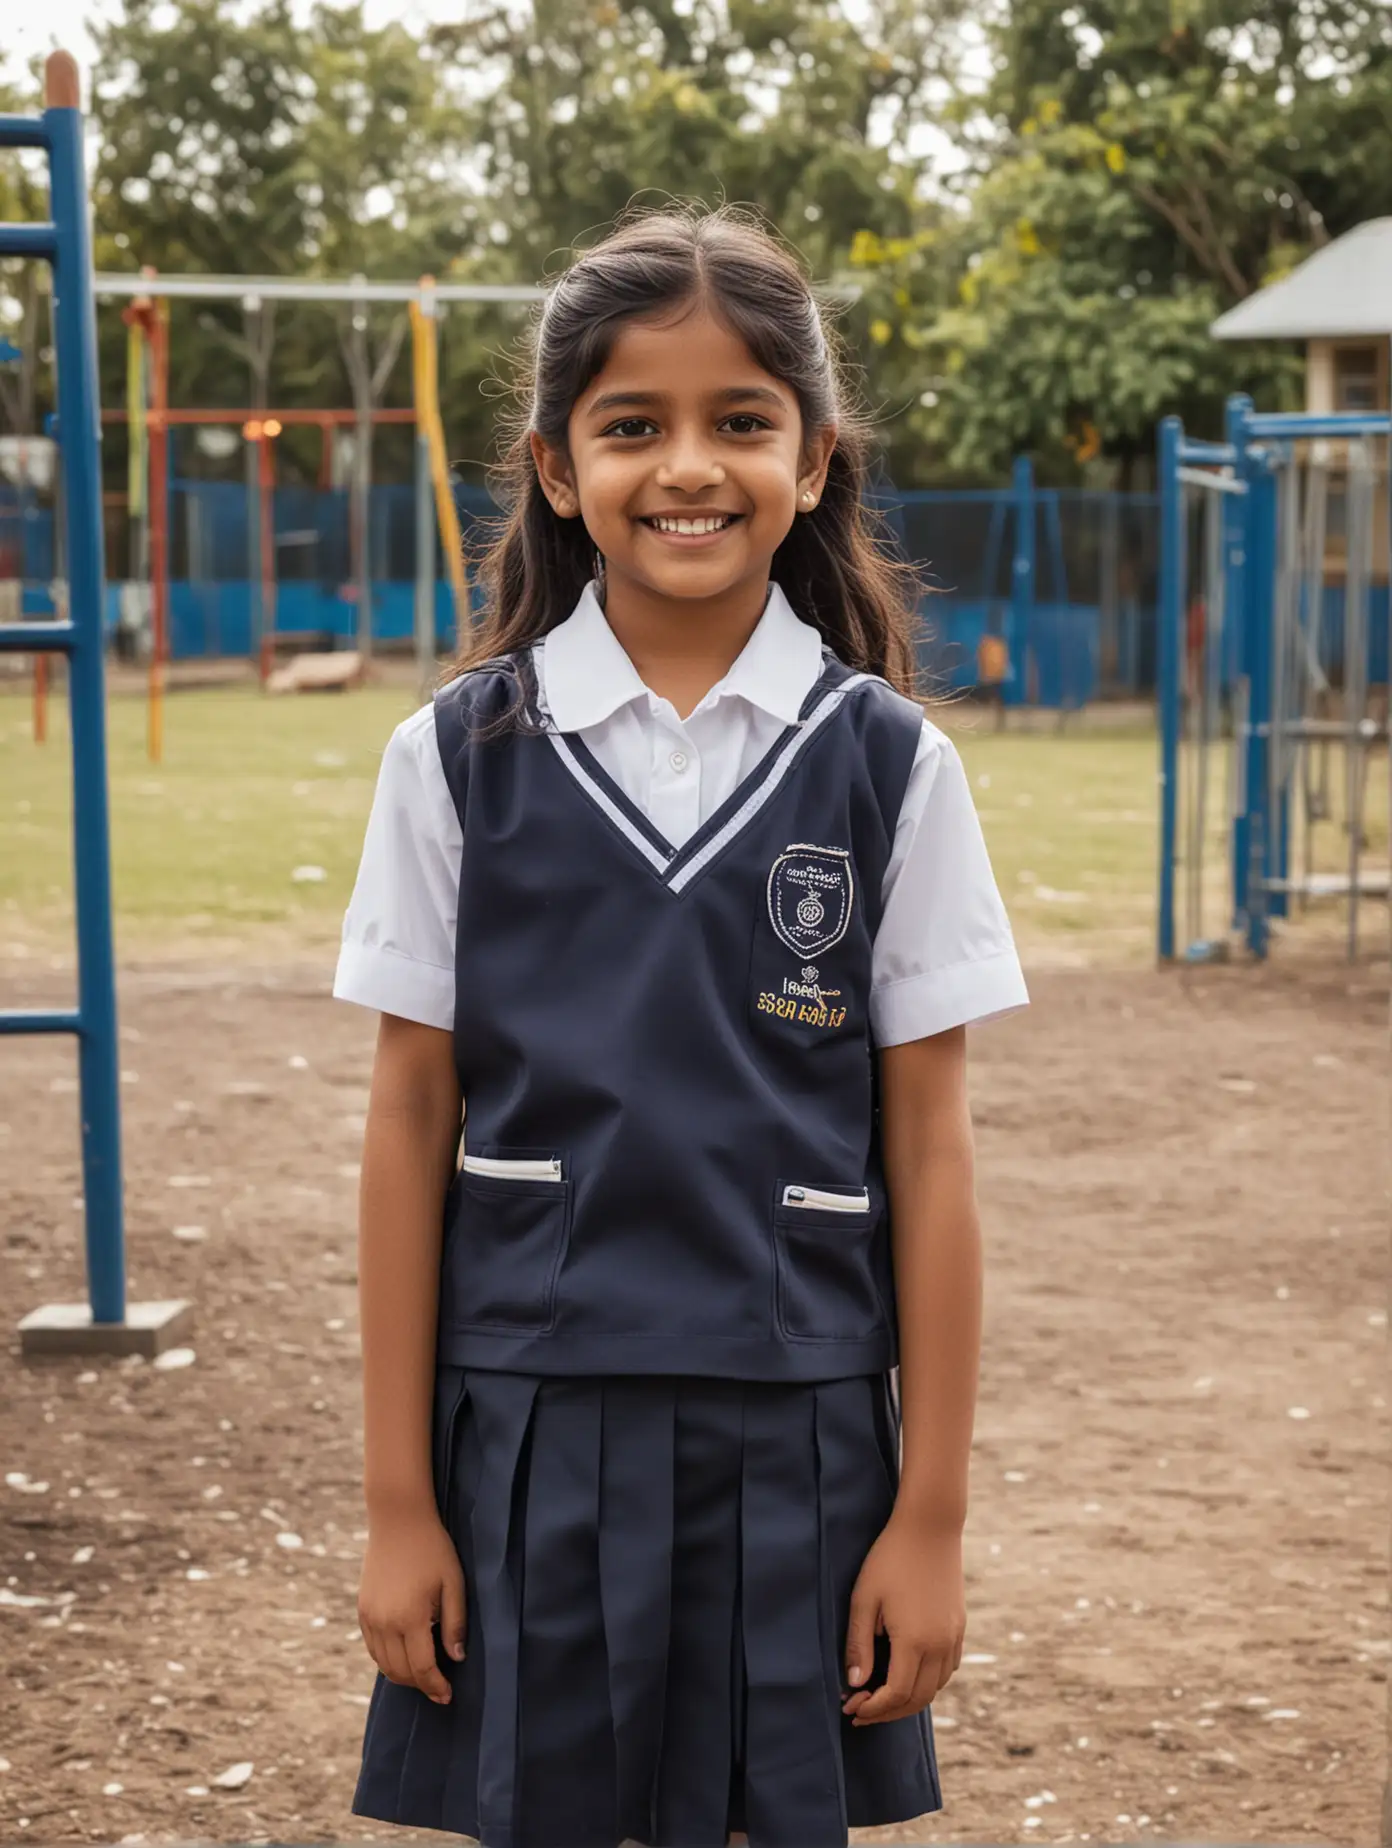 a Indian first grade elementary student, wearing school uniform, smiling, background is school playground